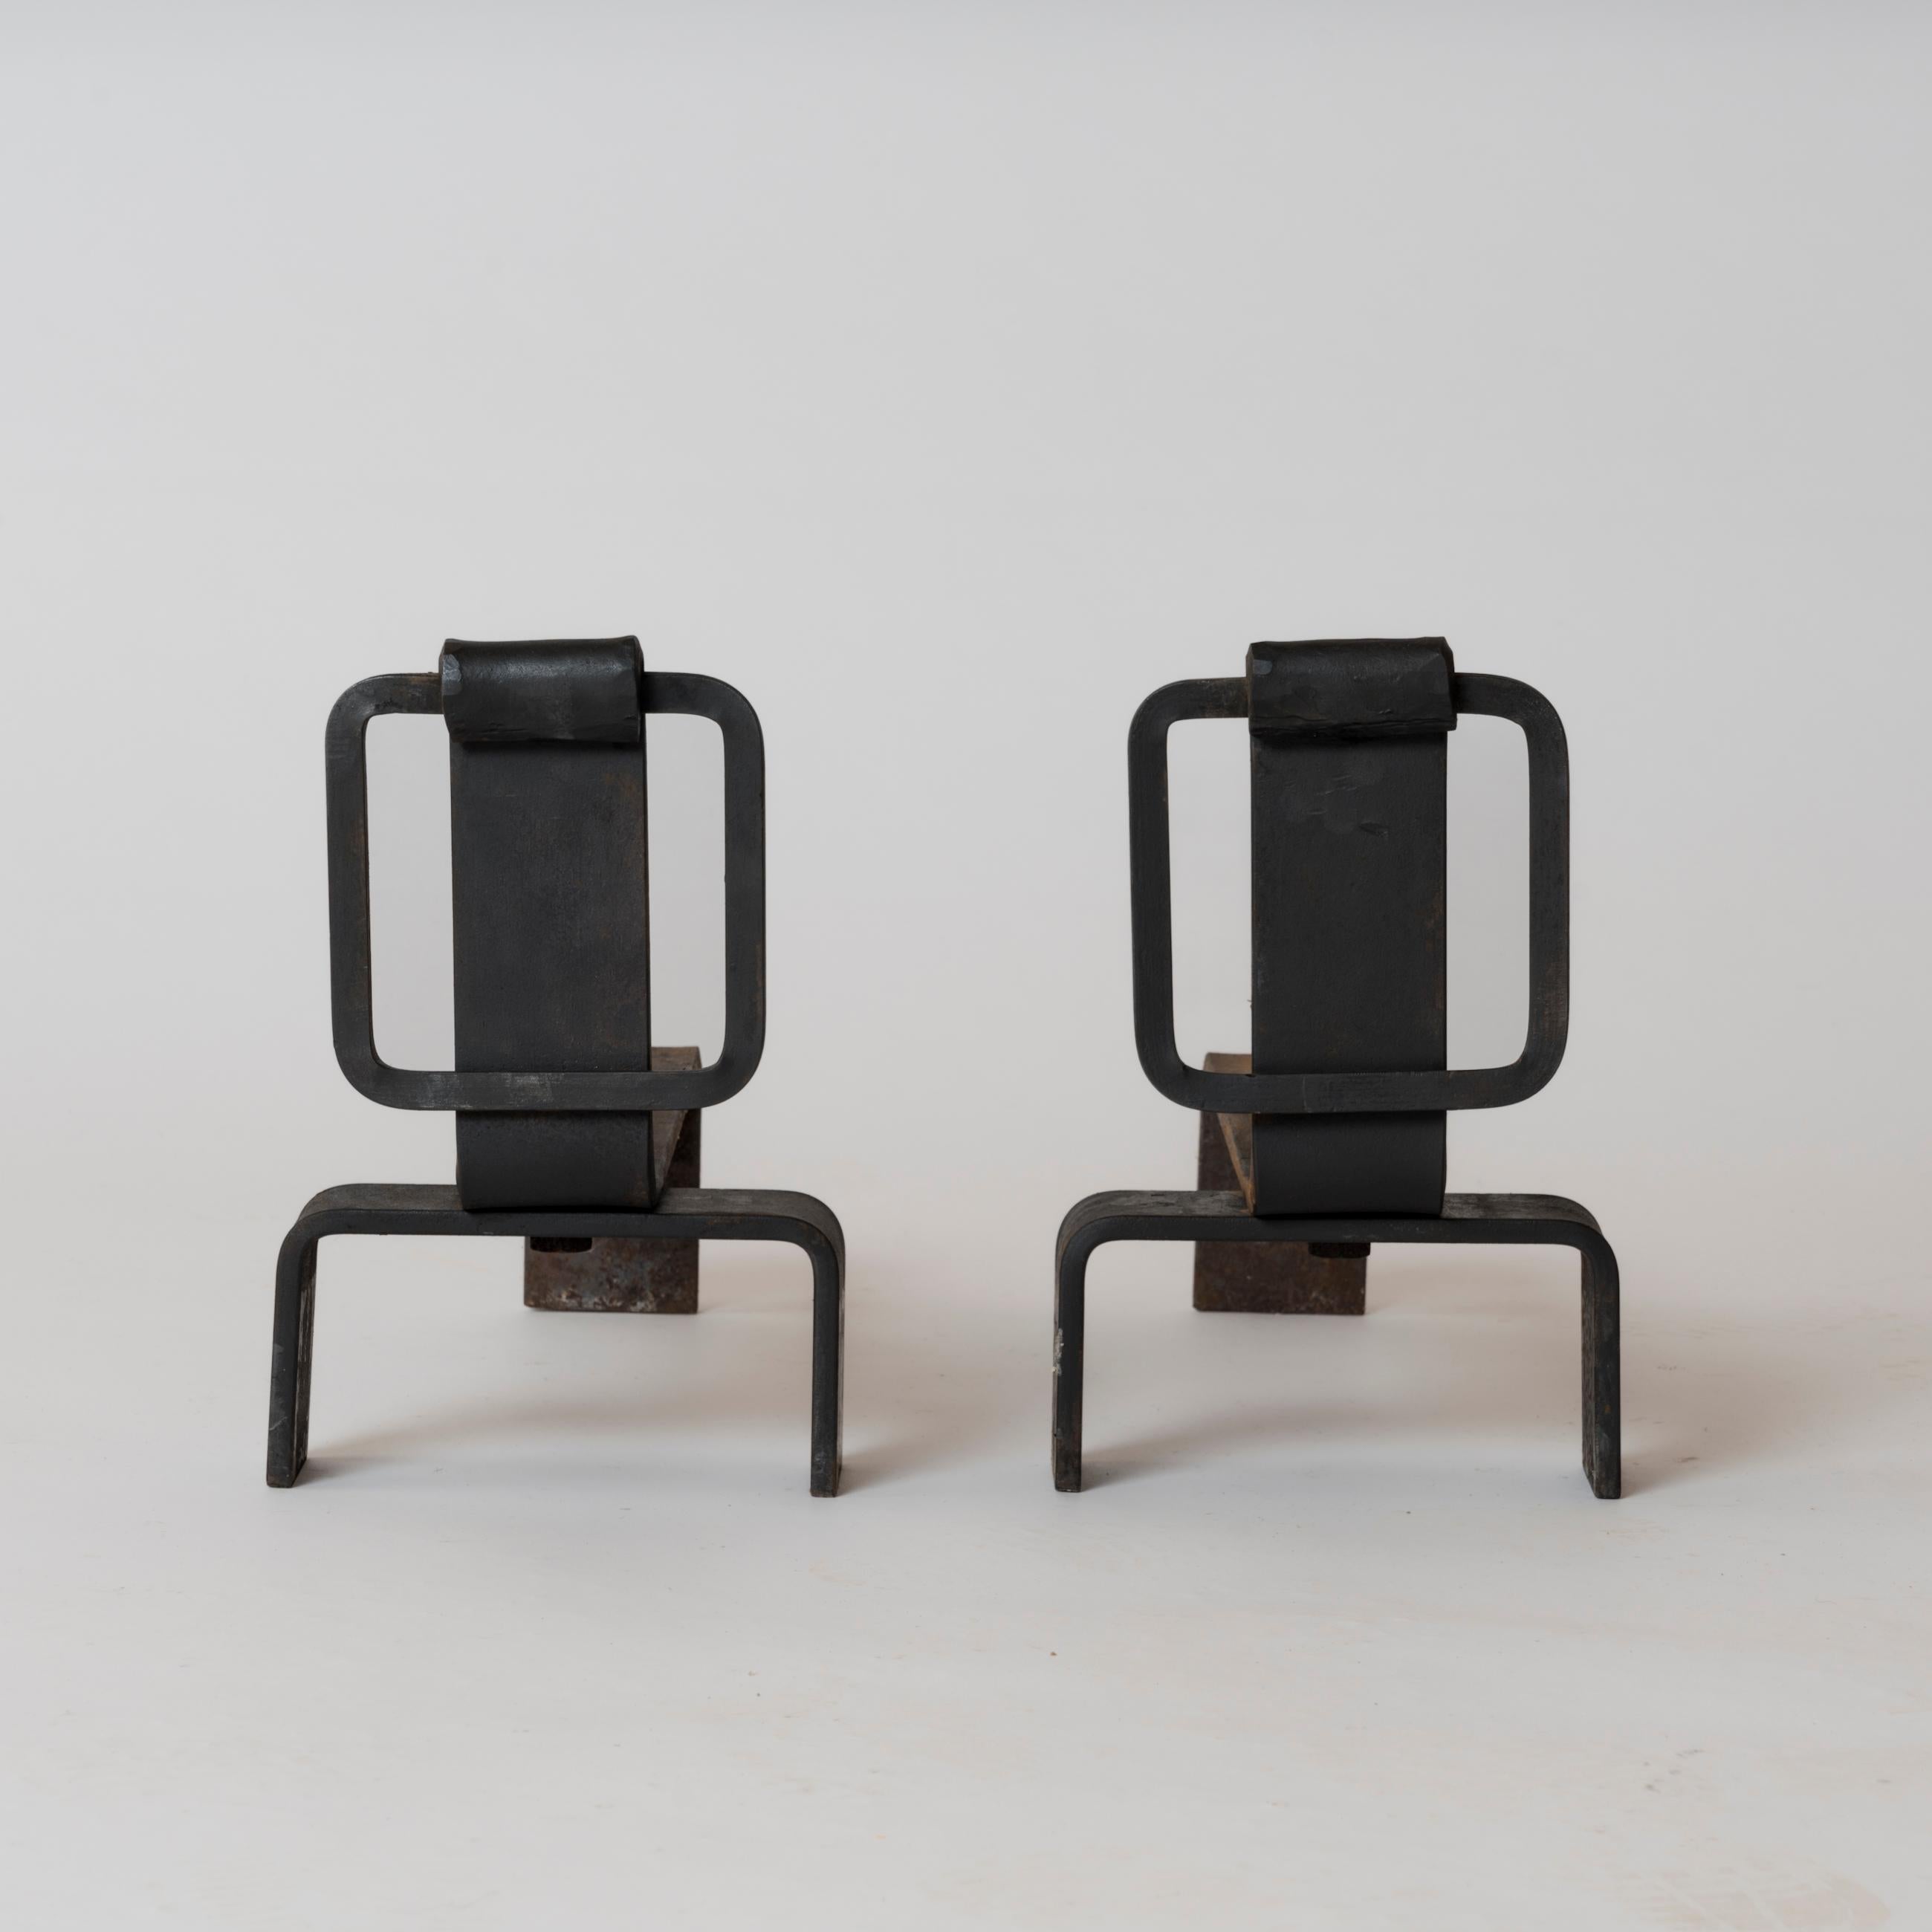 Pair of Brutalist, minimalist cast steel andirons with square motif buckle on the front side.
These andirons will ship from France and can be returned to either France or to a LIC NY location.